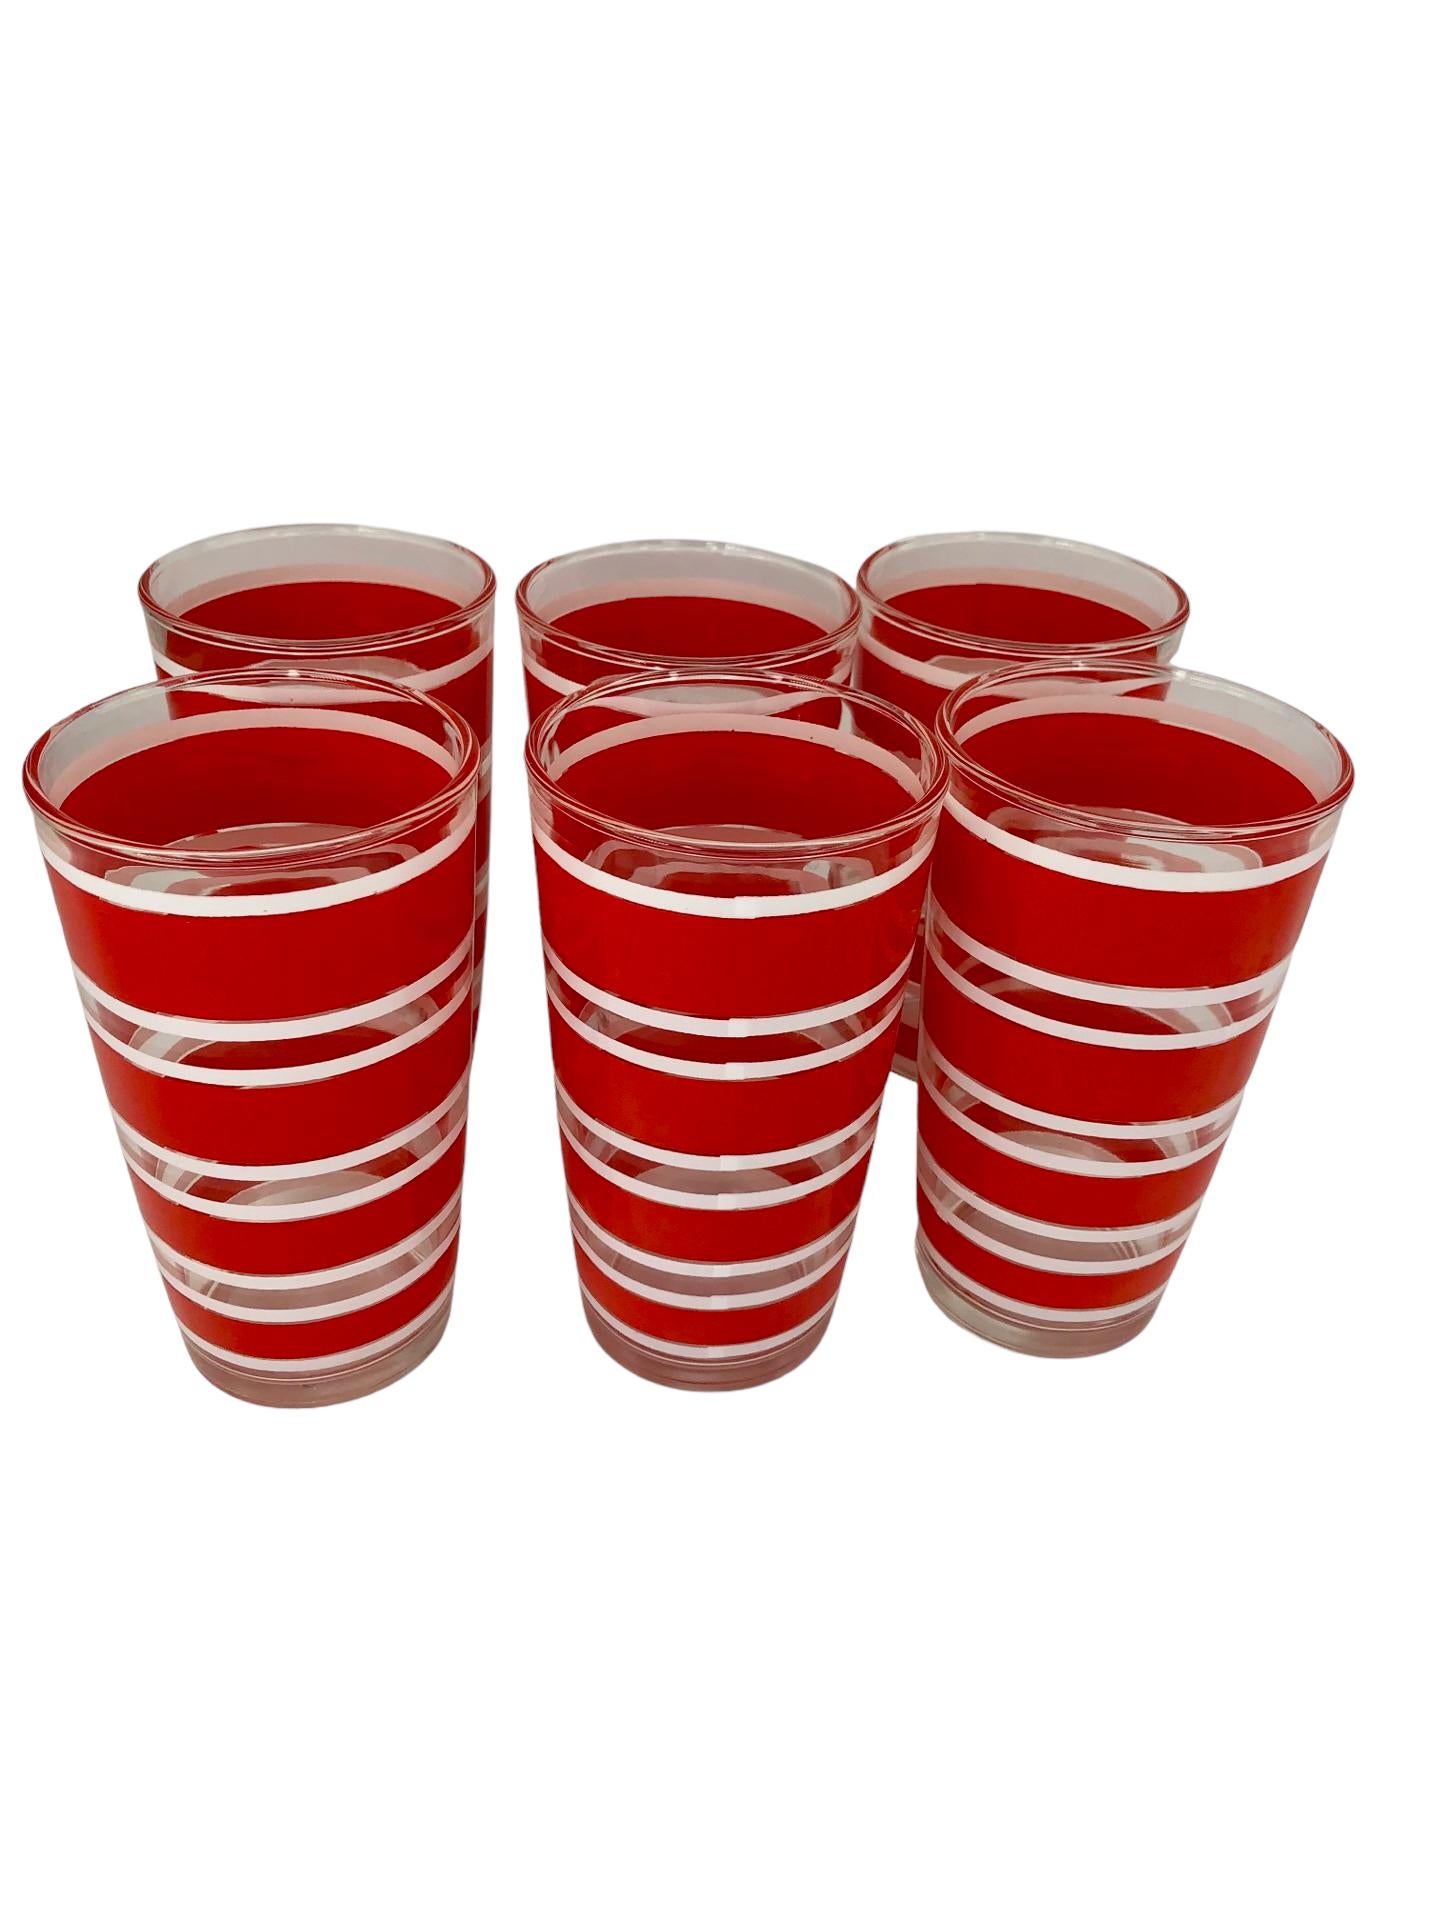 Set of Vintage Hazel-Atlas Red and White Banded High Ball Glasses in Metal Caddy For Sale 2